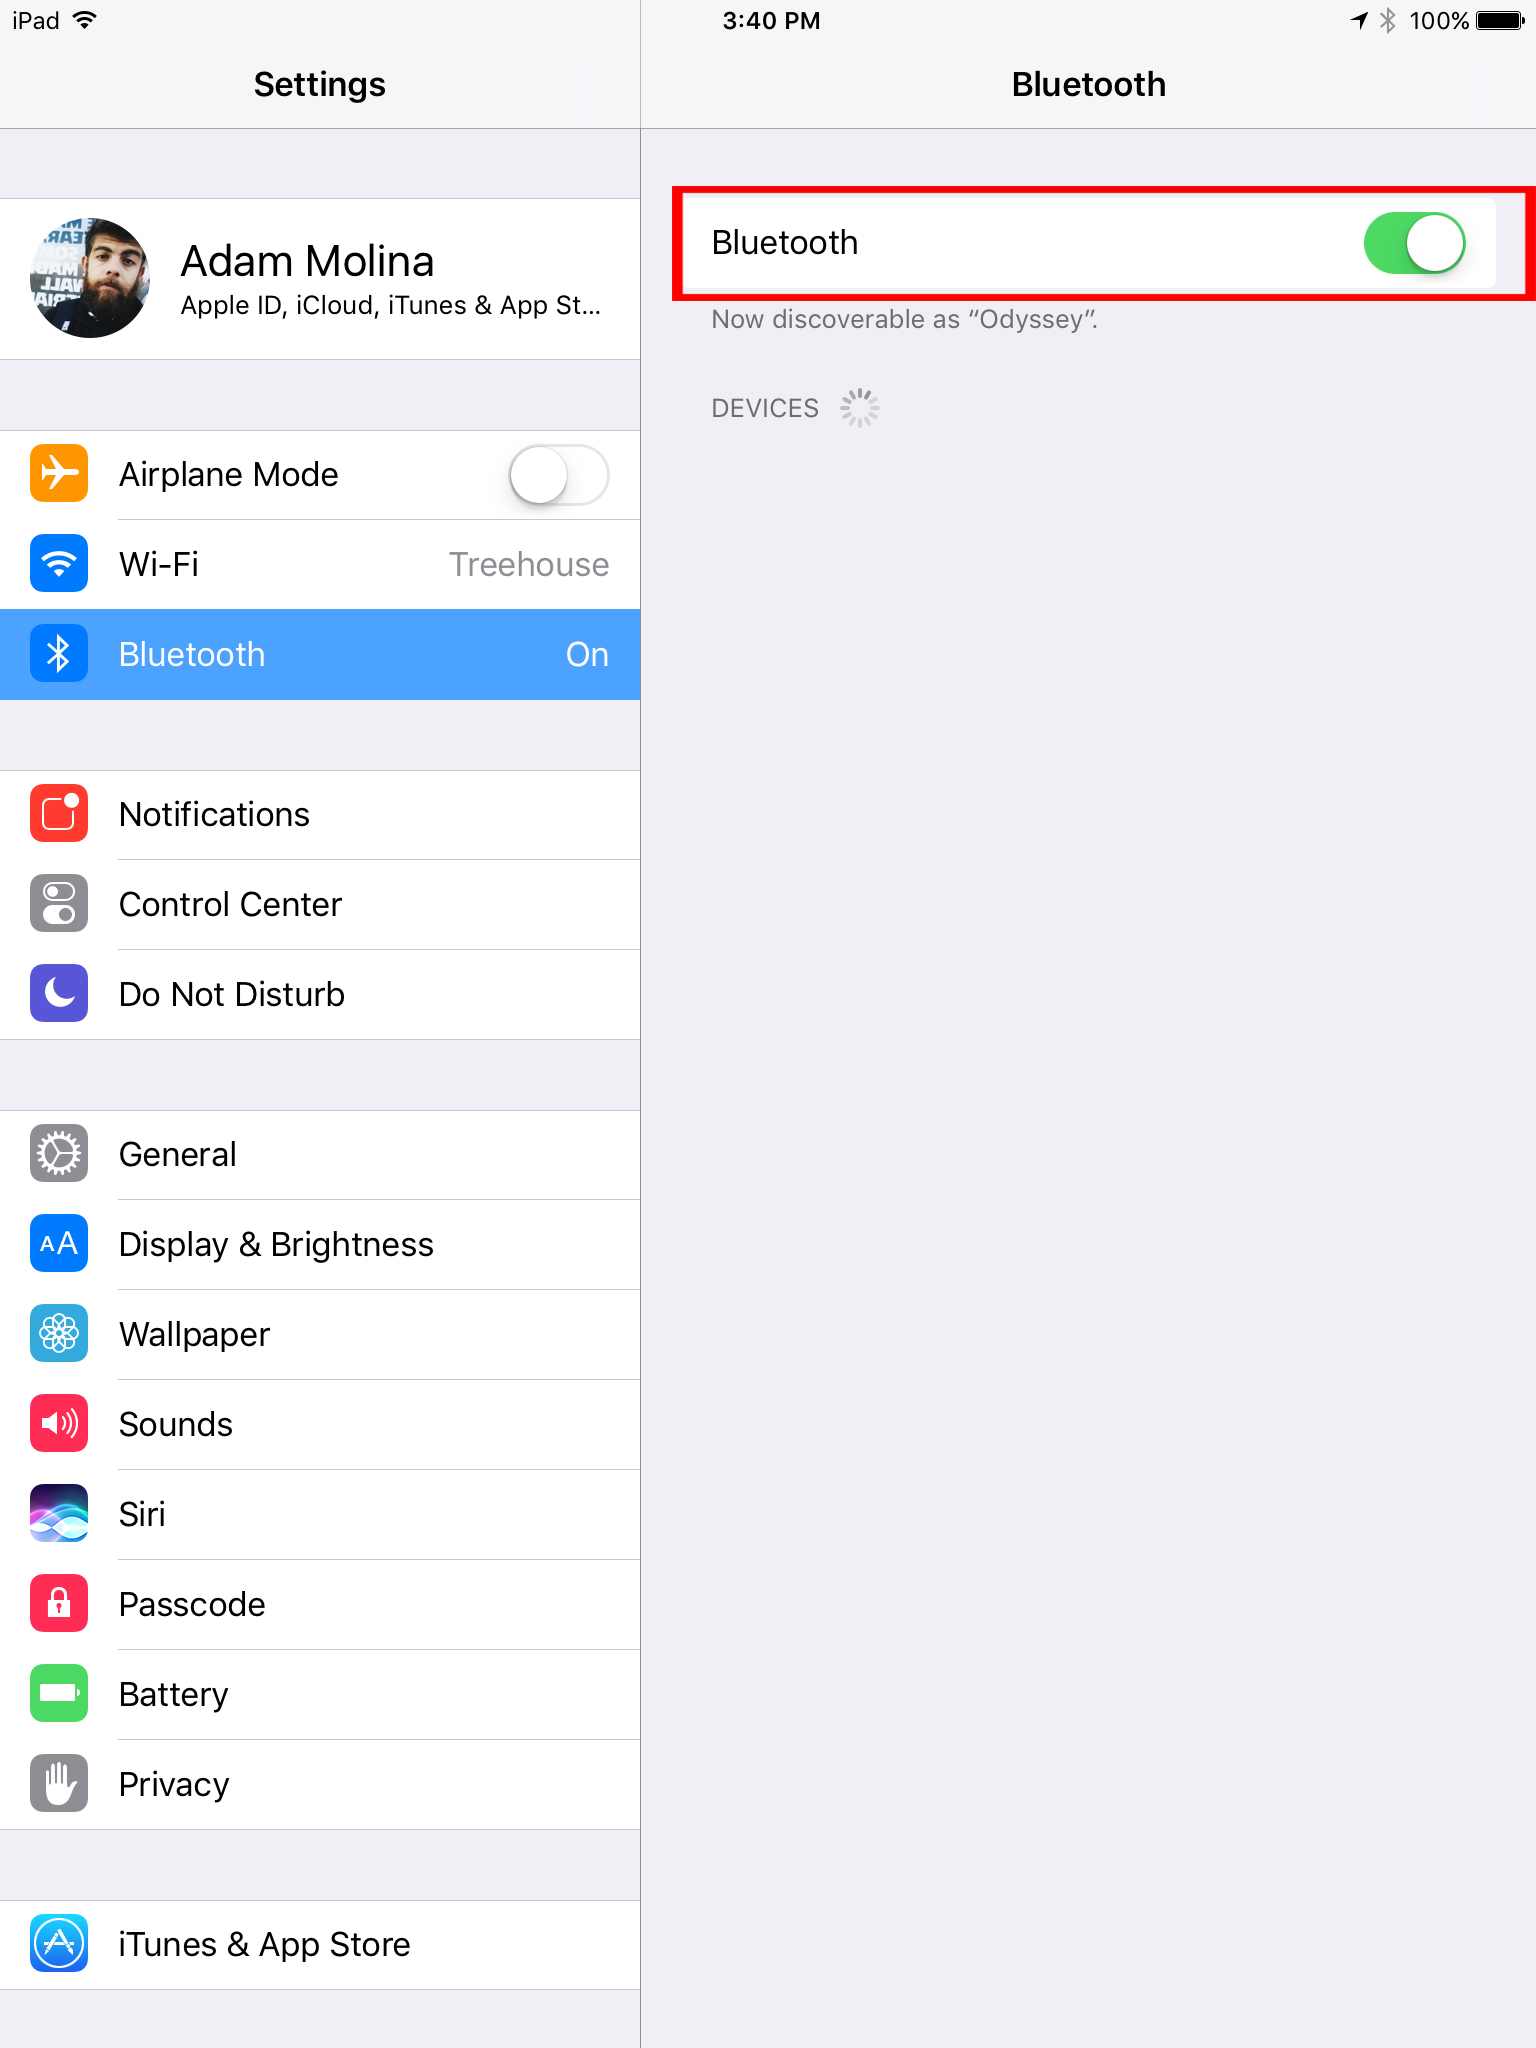 A screenshot for how to use Bluetooth on an iOS devices like an iPhone or iPad with the Settings app open and Bluetooth toggle turned on.